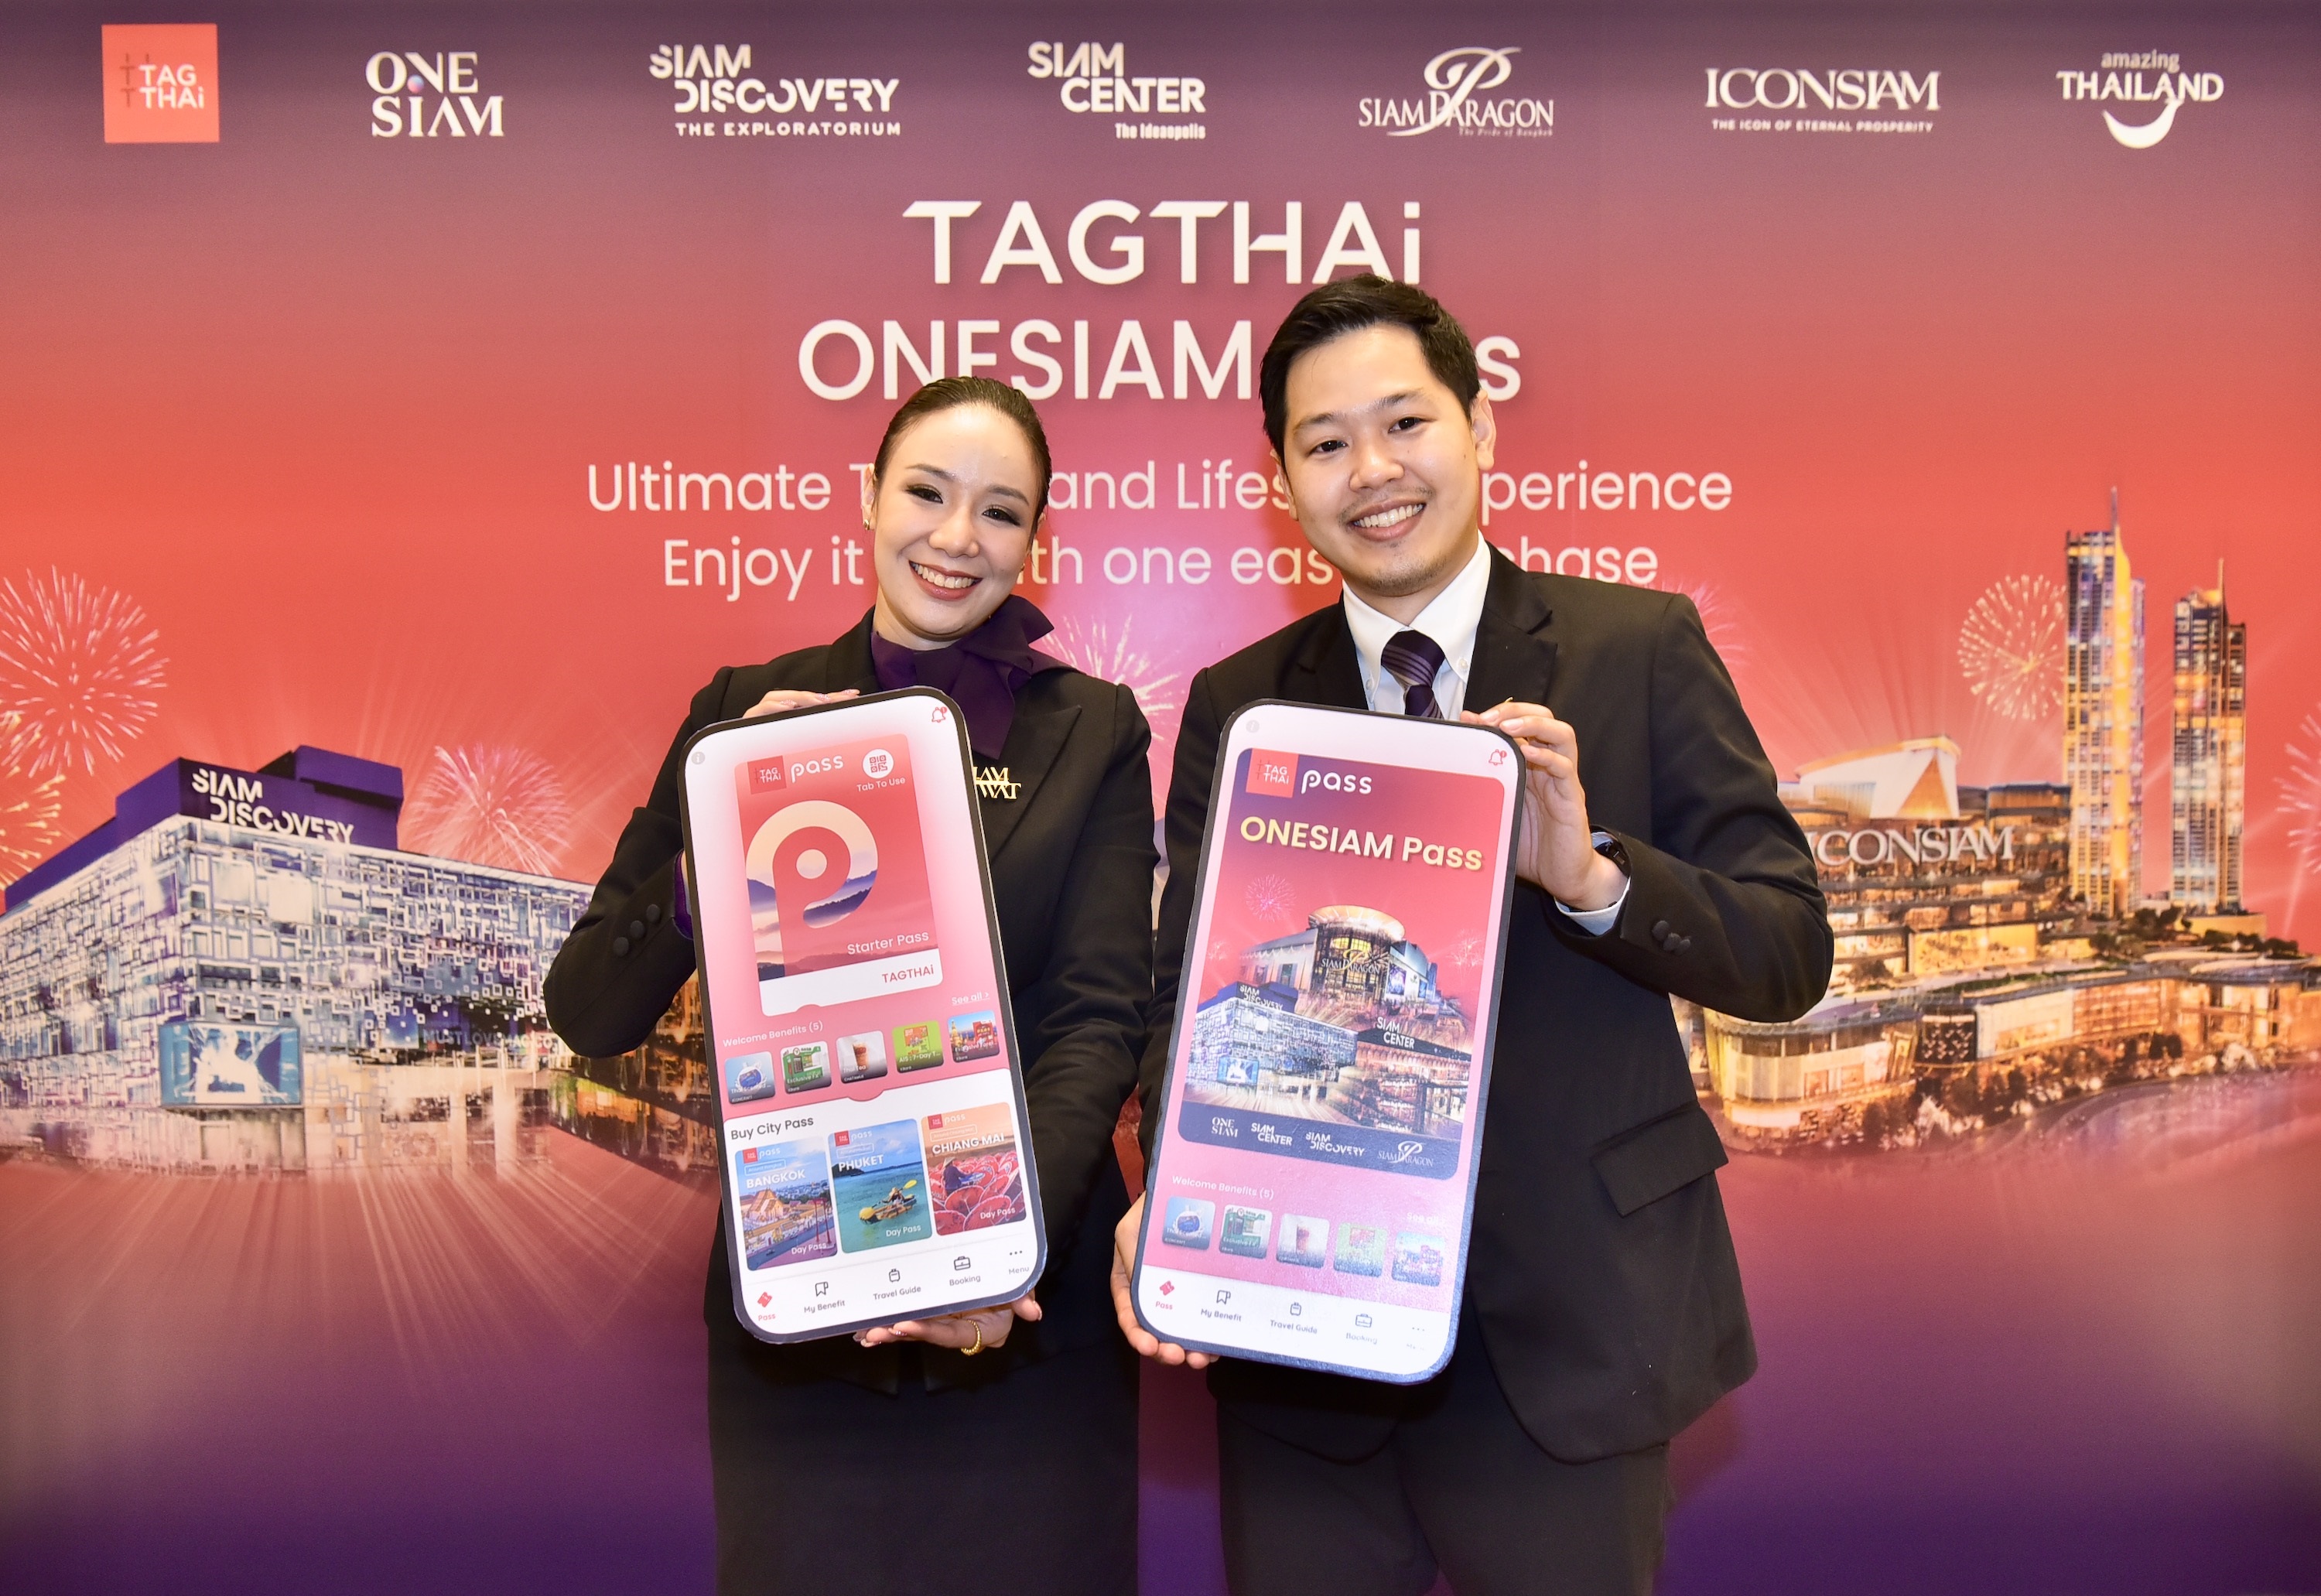 04 Siam Piwat and TAGTHAi team up to boost tourism with integrated Thailand travel platform